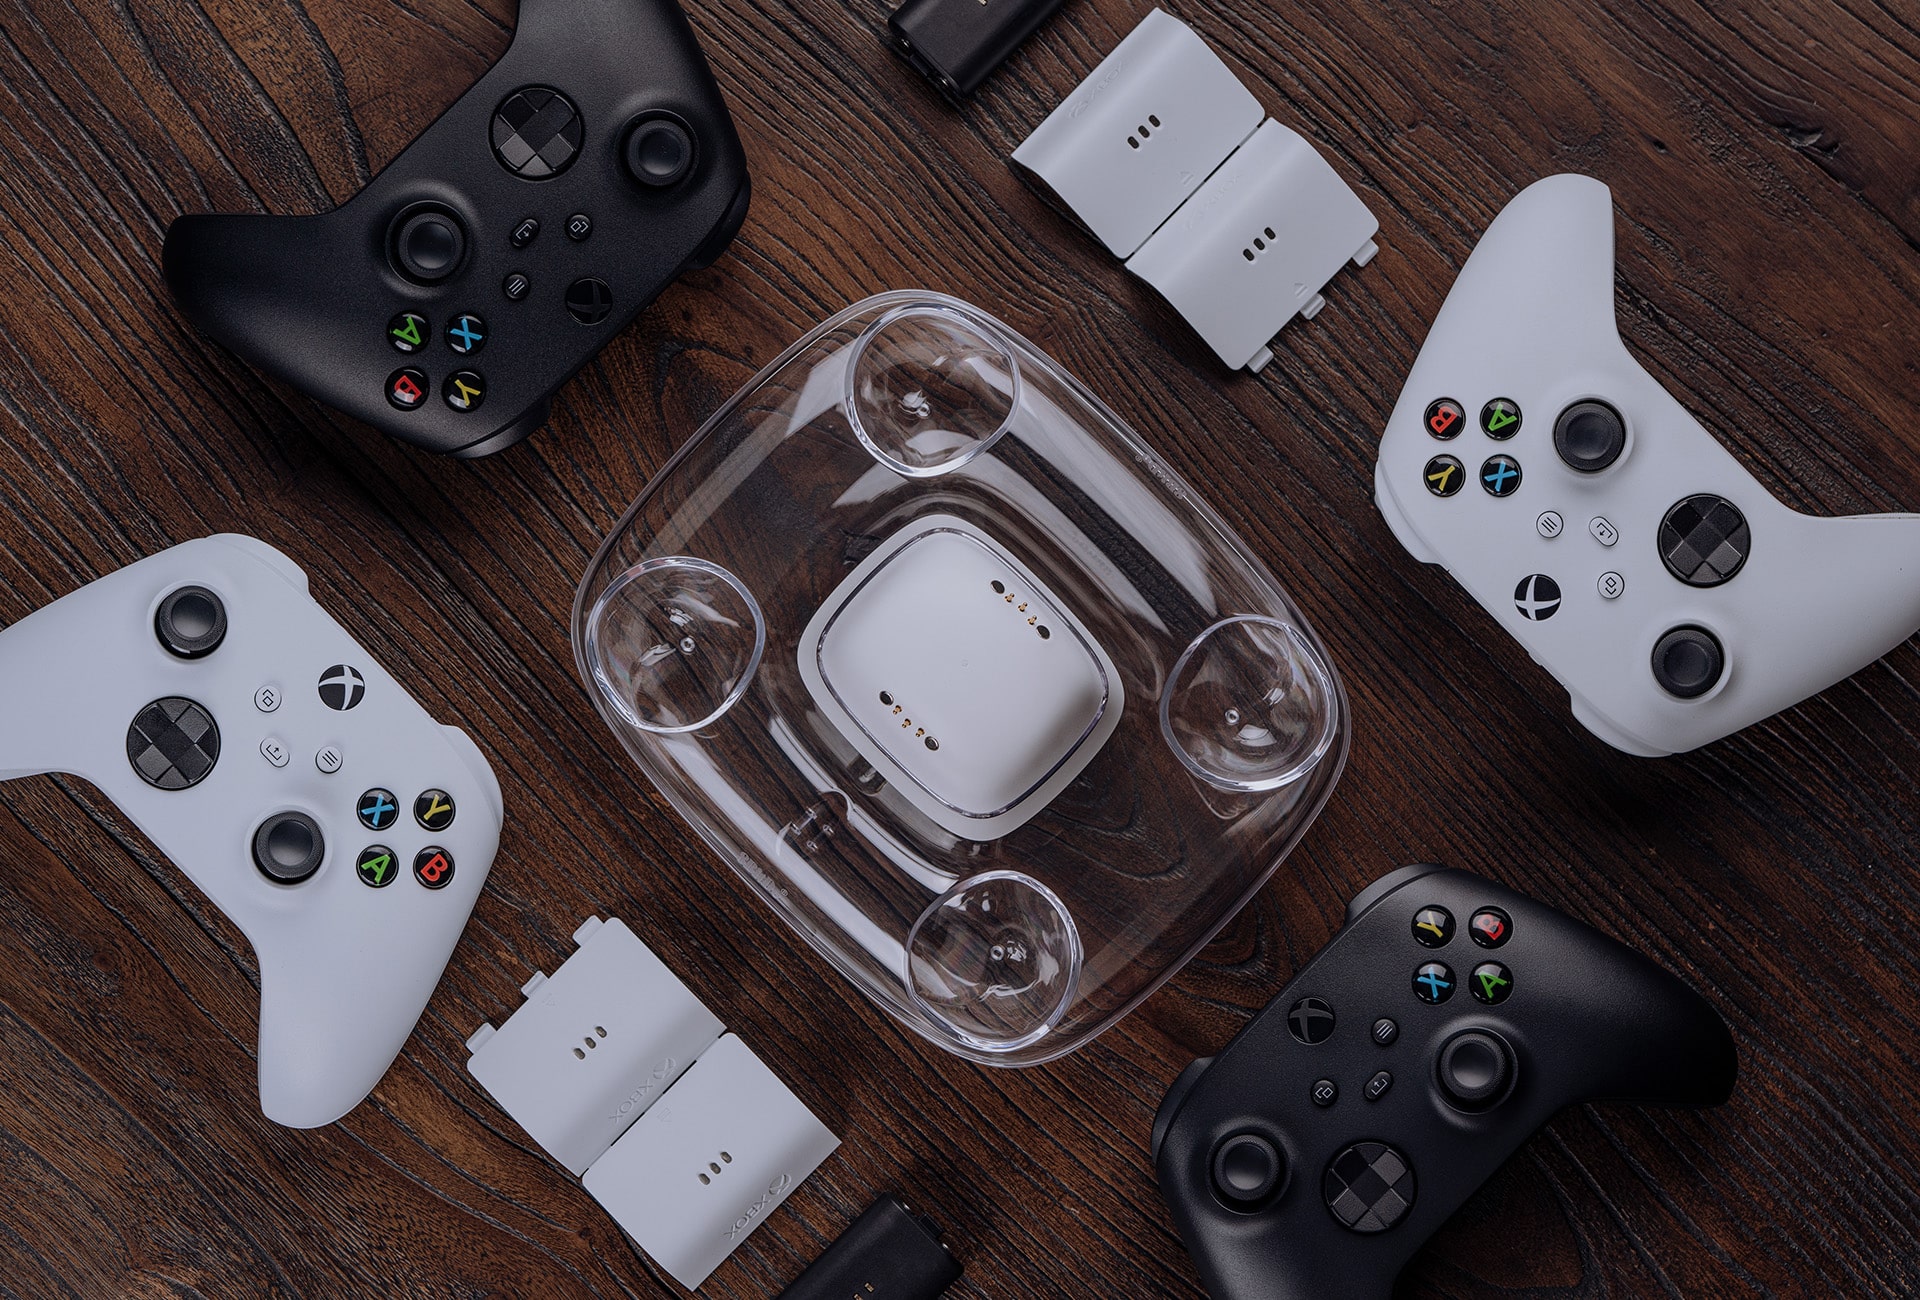 8BitDo Dual Charging Dock for Xbox wireless controllers